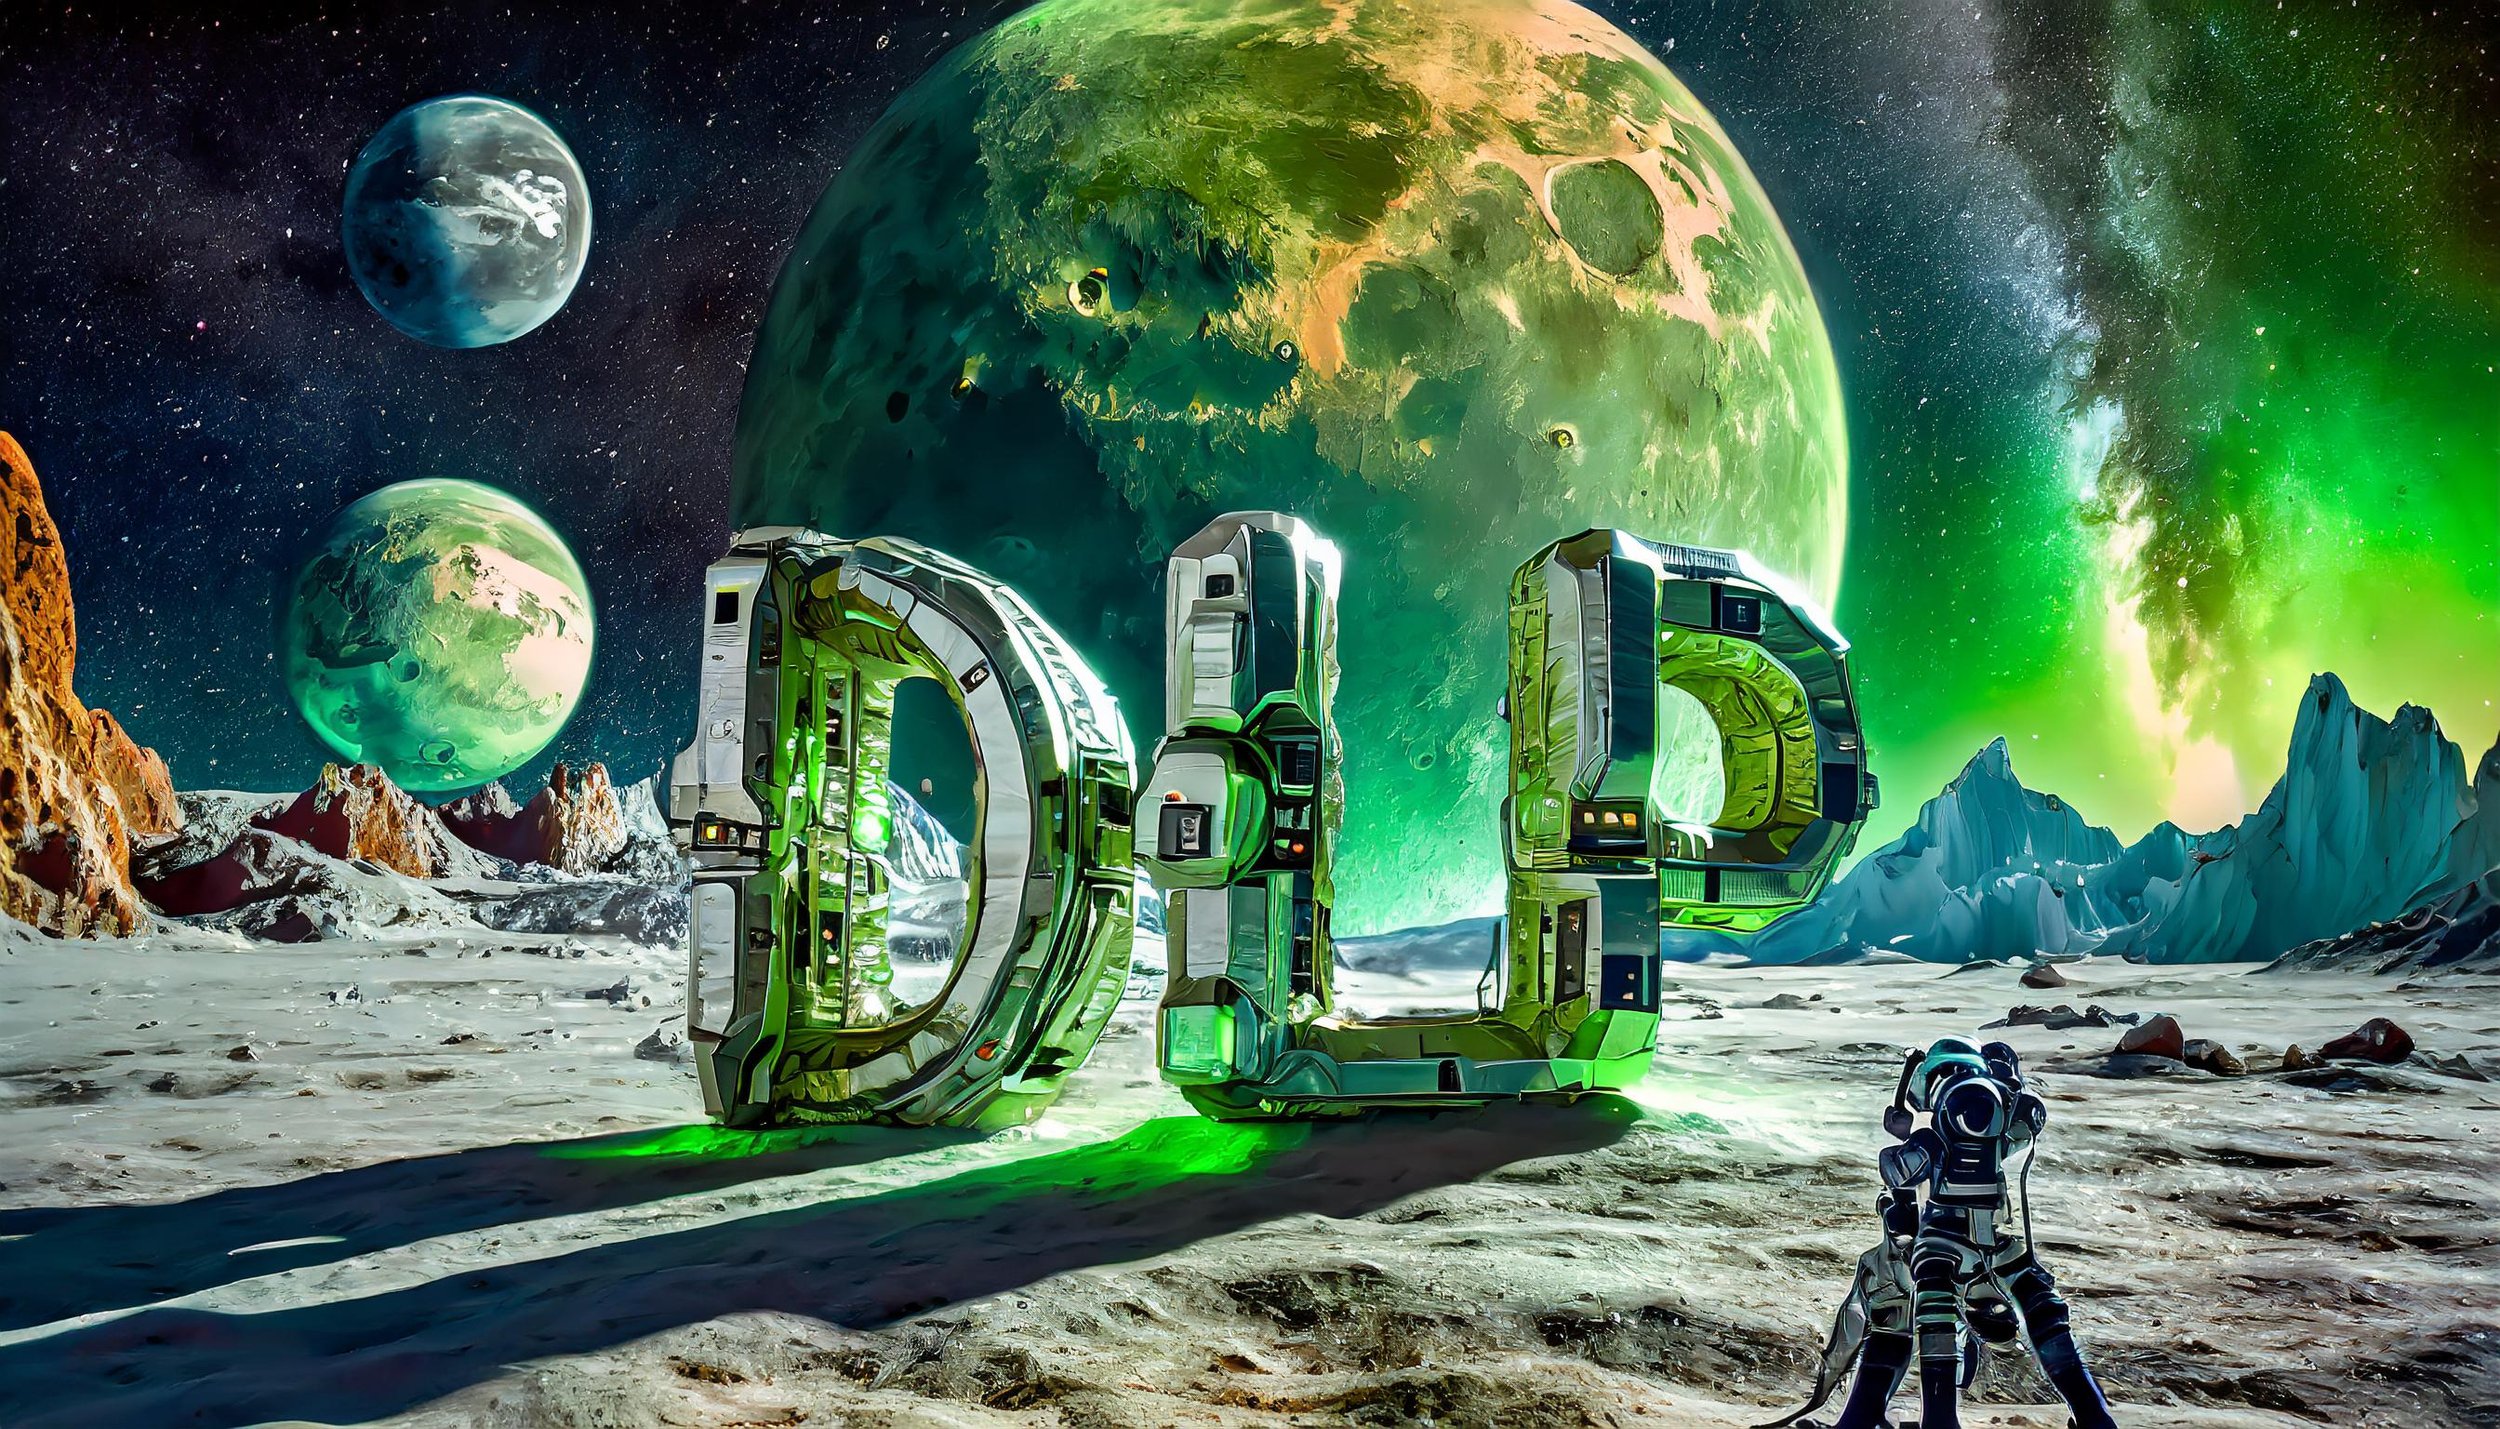 Firefly the large letters DLP, which are green in color , sit together on the moon in outer space. s.jpg